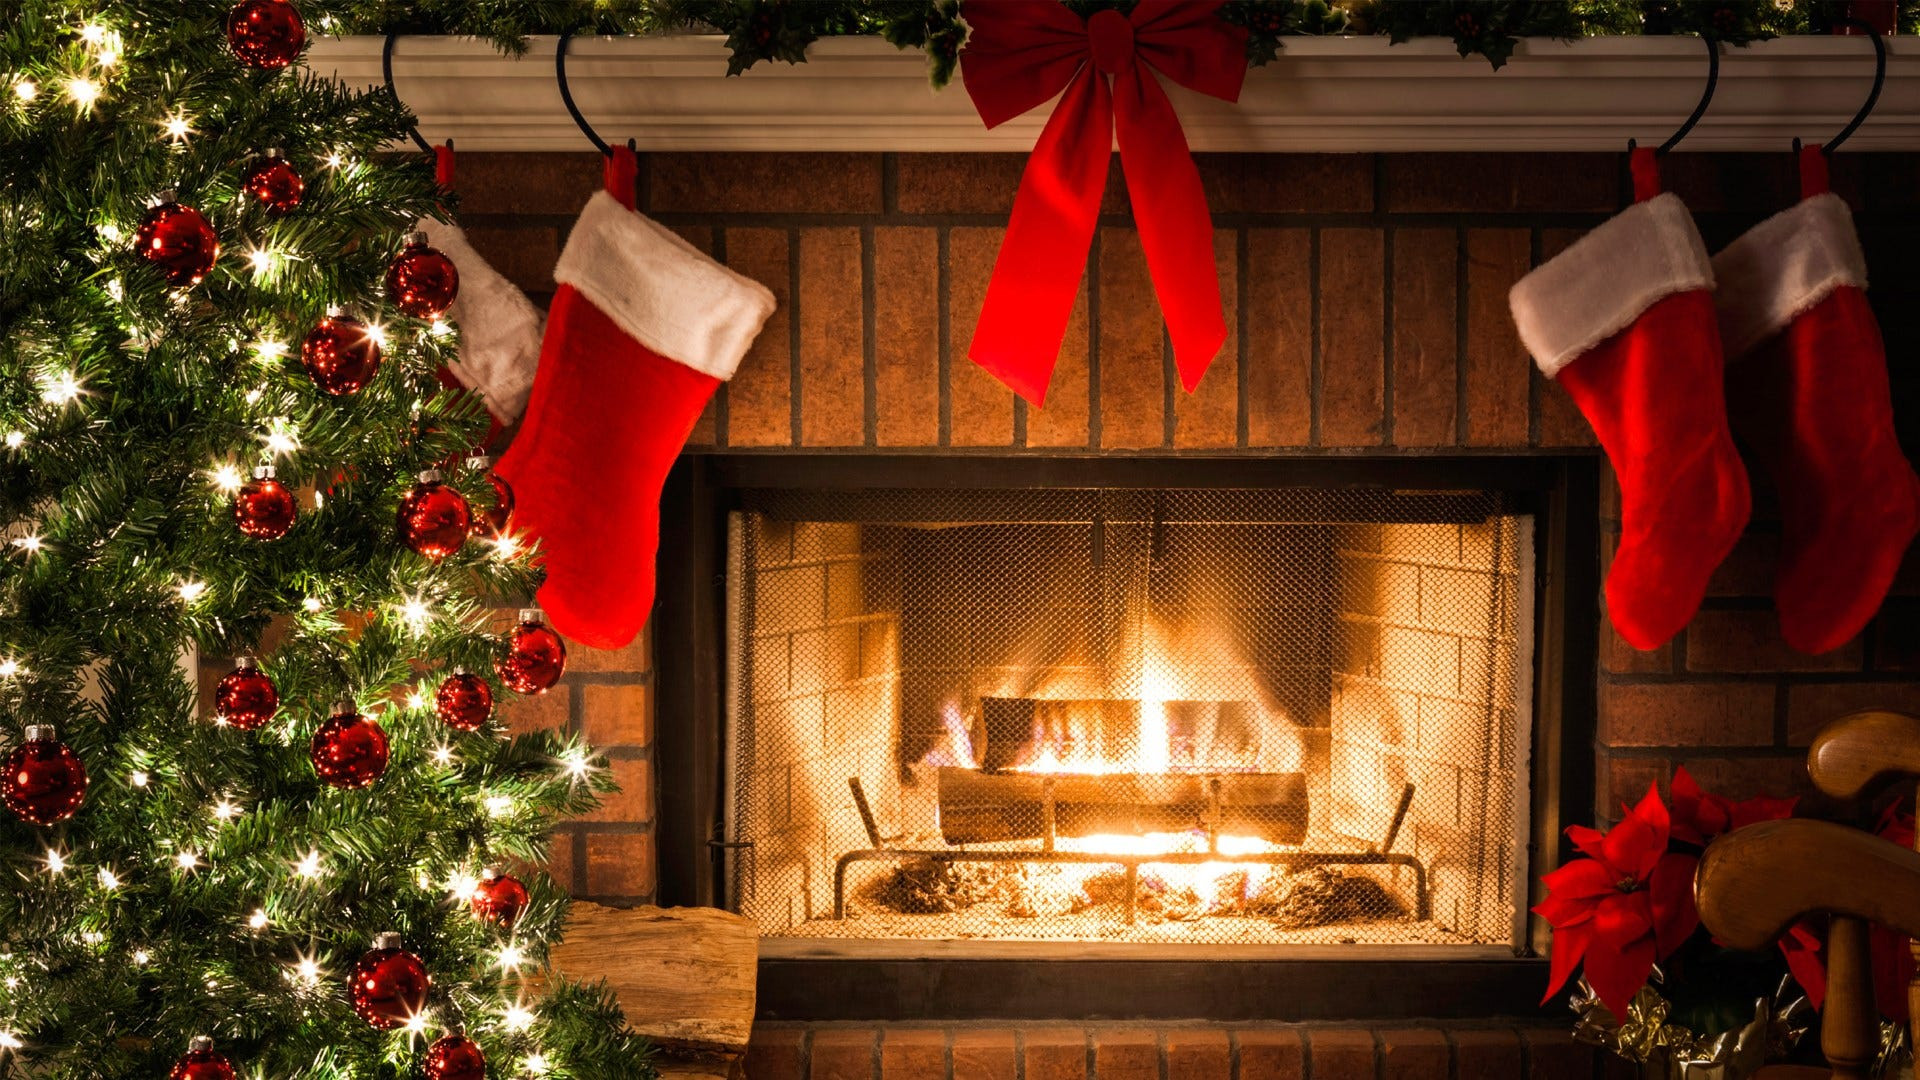 Christmas Themed Fireplace Screen
 New holiday themed radio station debuts in Myrtle Beach